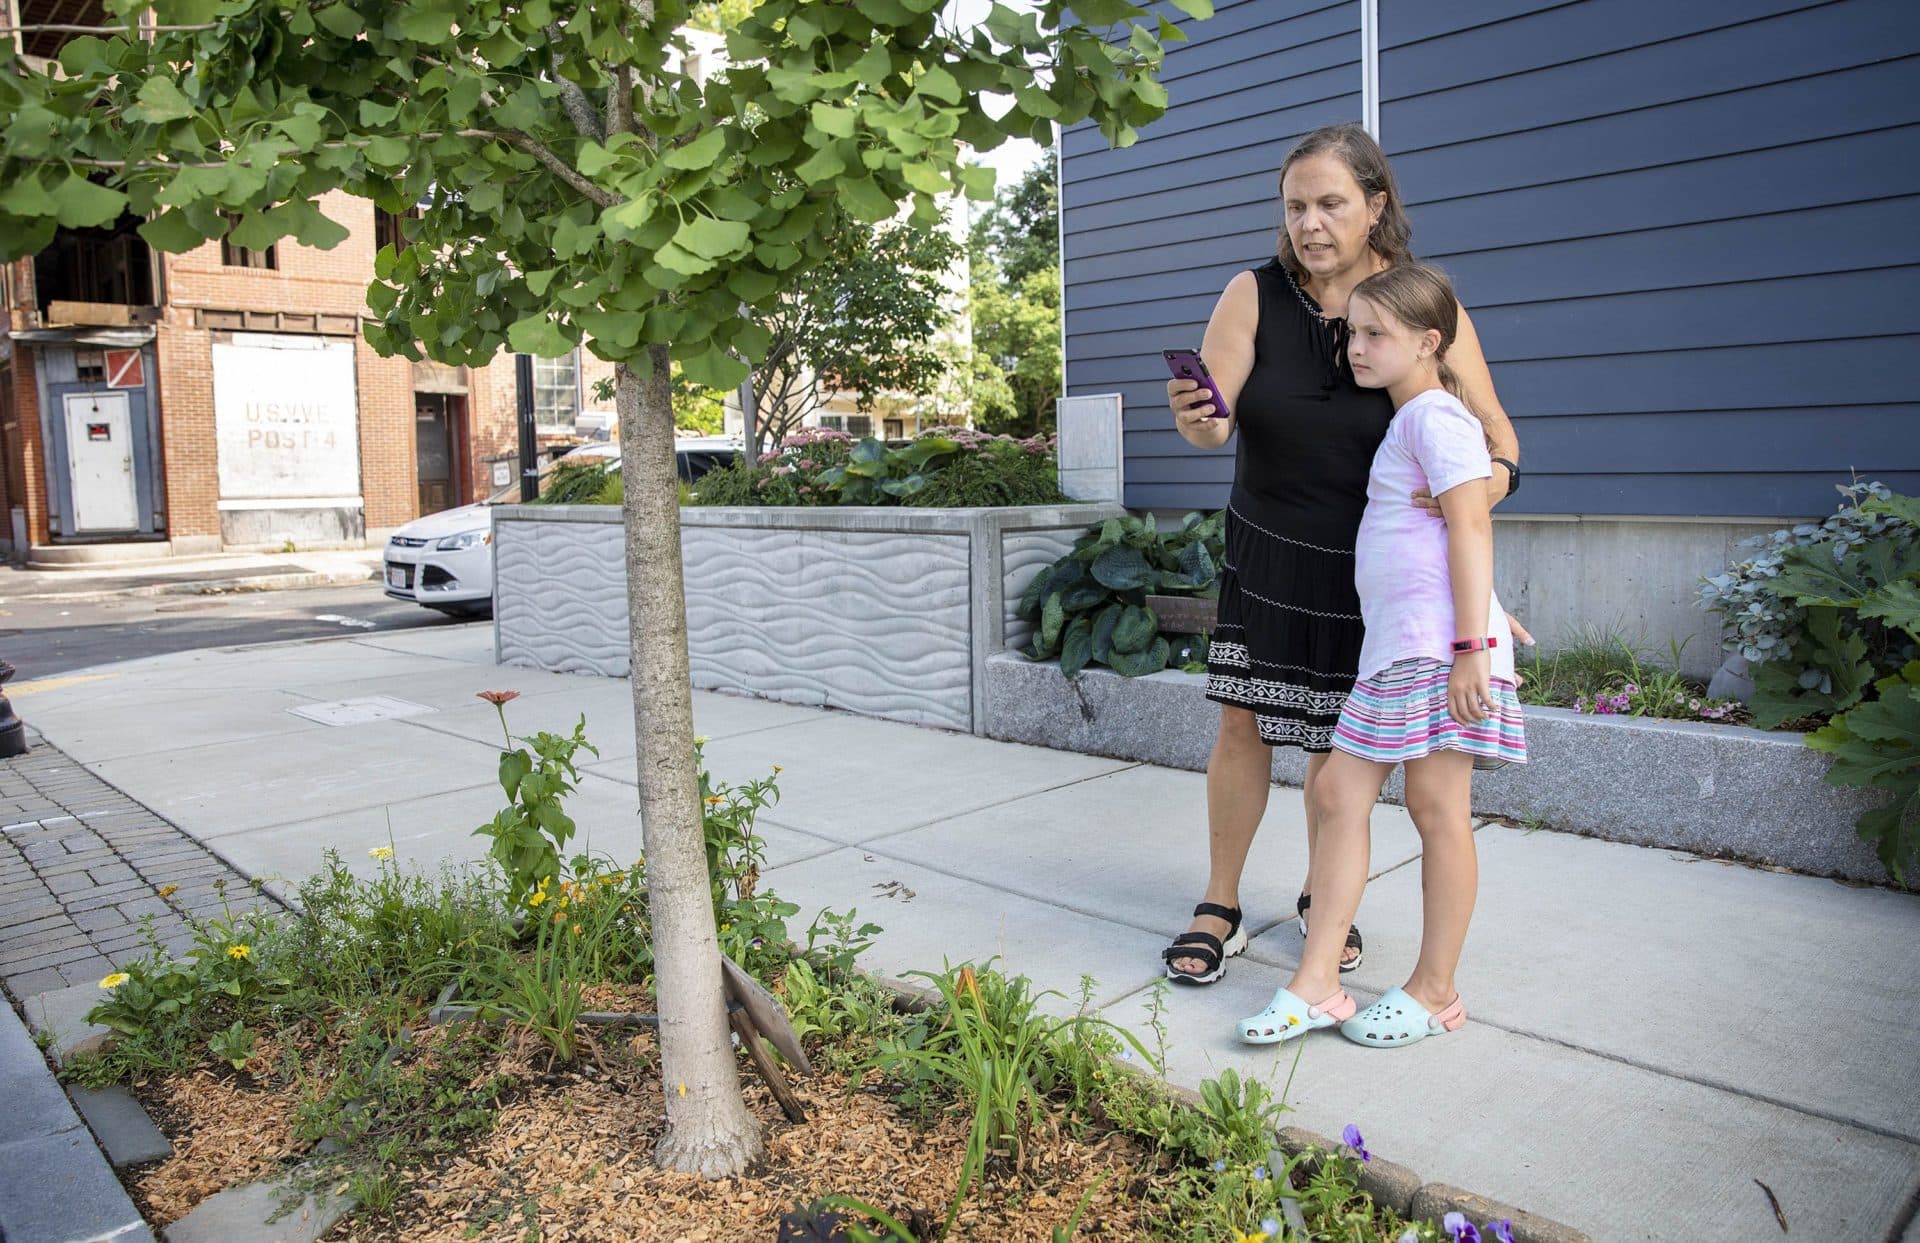 Eugenia Corbo and her daughter, Maite, enter data about their chosen ginkgo tree in East Boston into the i-Tree app. (Robin Lubbock/WBUR)